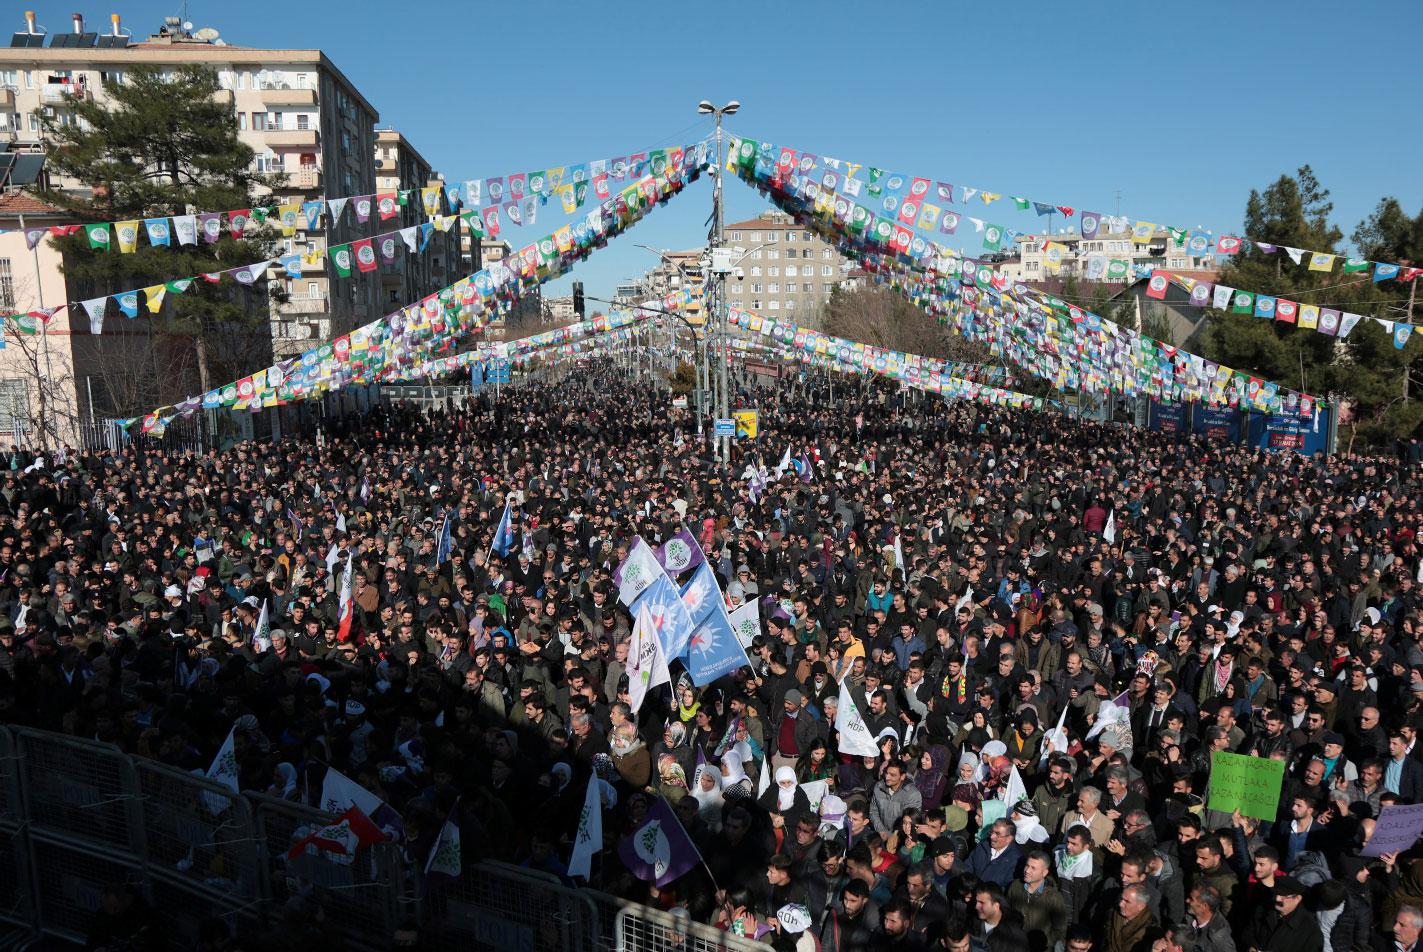 Supporters of pro-Kurdish Peoples' Democratic Party (HDP) attend a demonstration in solidarity with the jailed lawmaker Leyla Guven, in Diyarbakir, Turkey January 19, 2019.